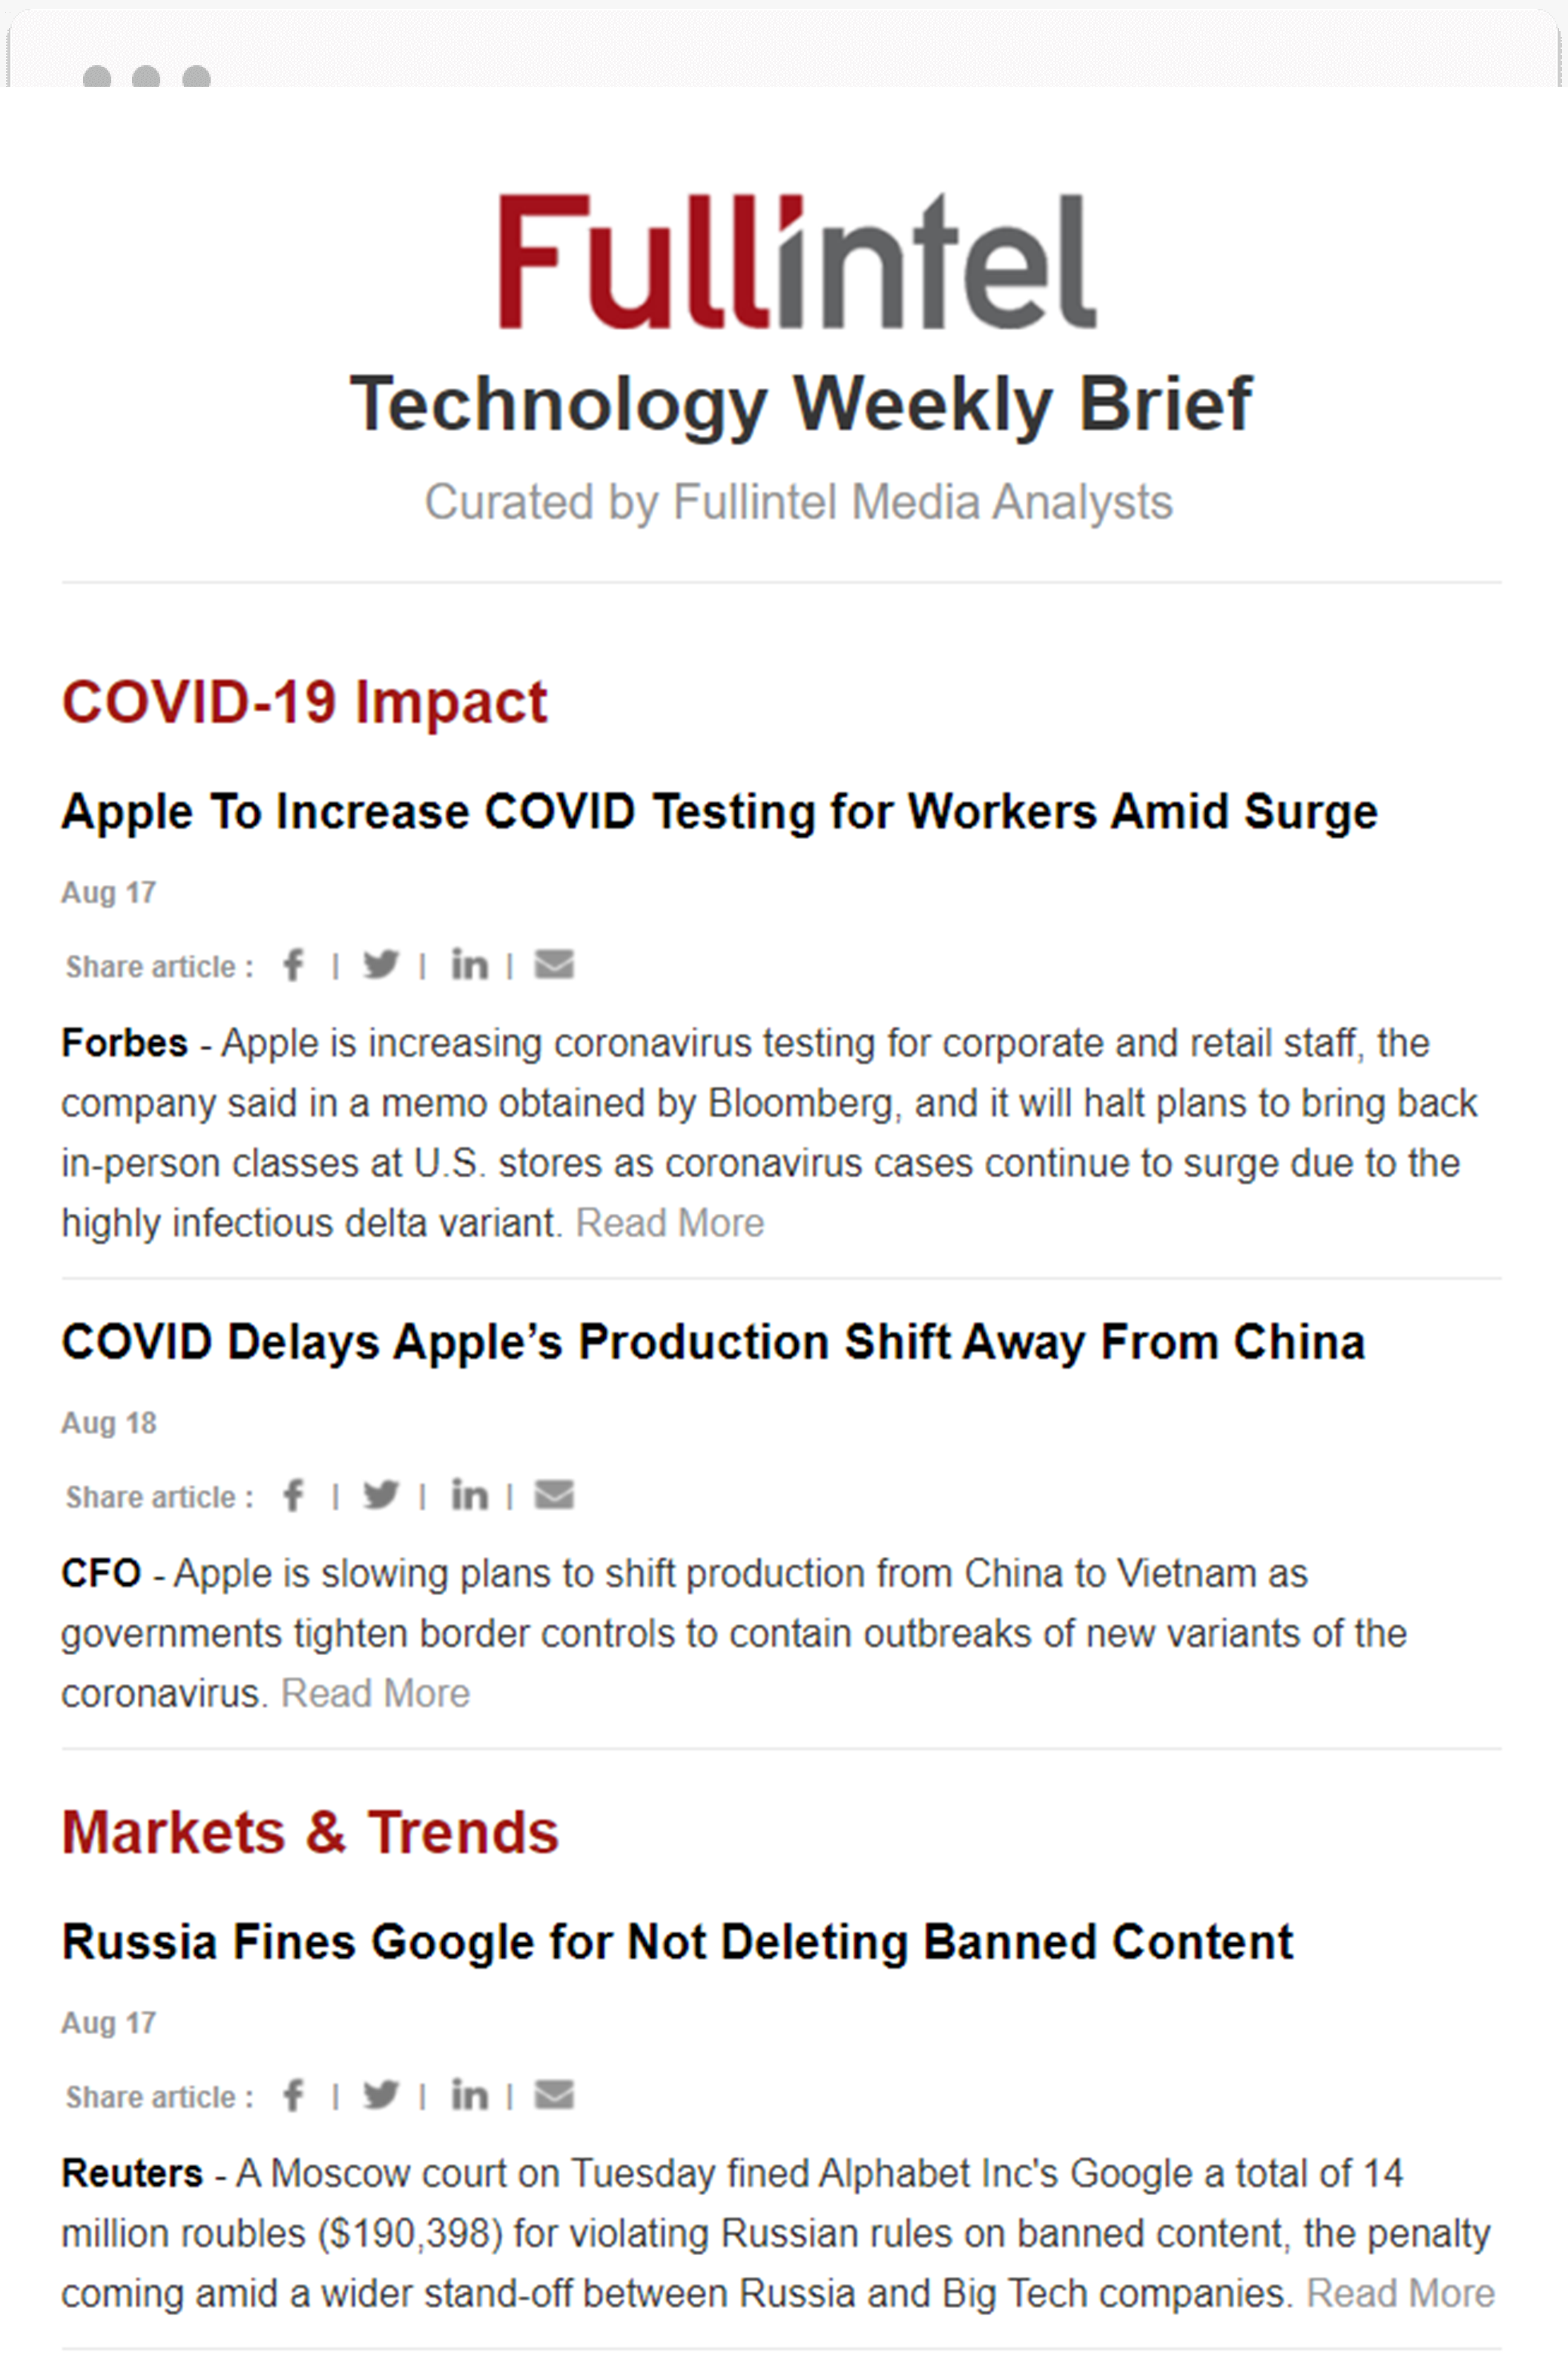 Weekly Technology Industry Brief